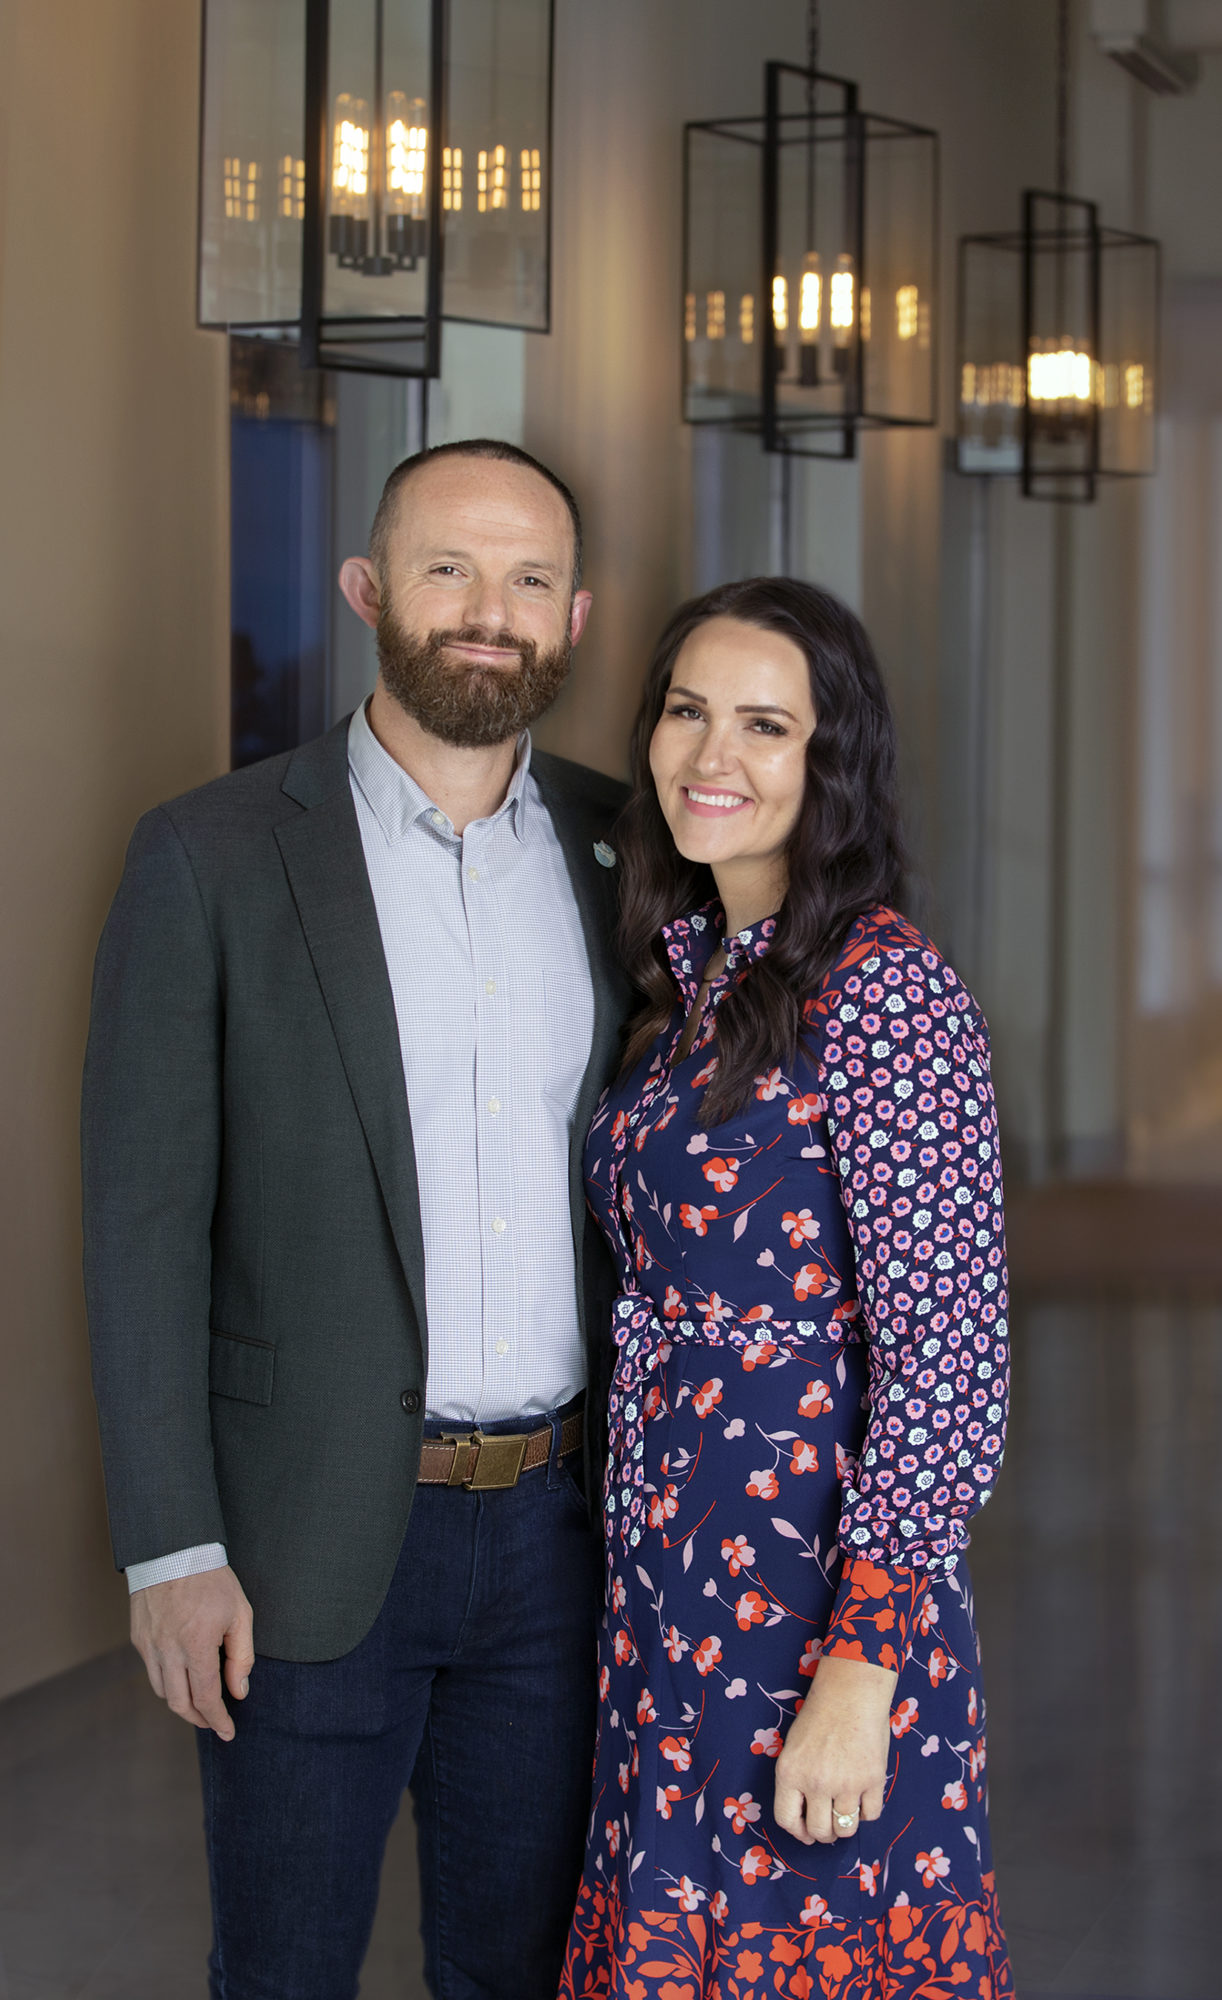 In the January issue of the founder series, Sam and Kacie Malouf share their story of how they changed home bedding for the better.